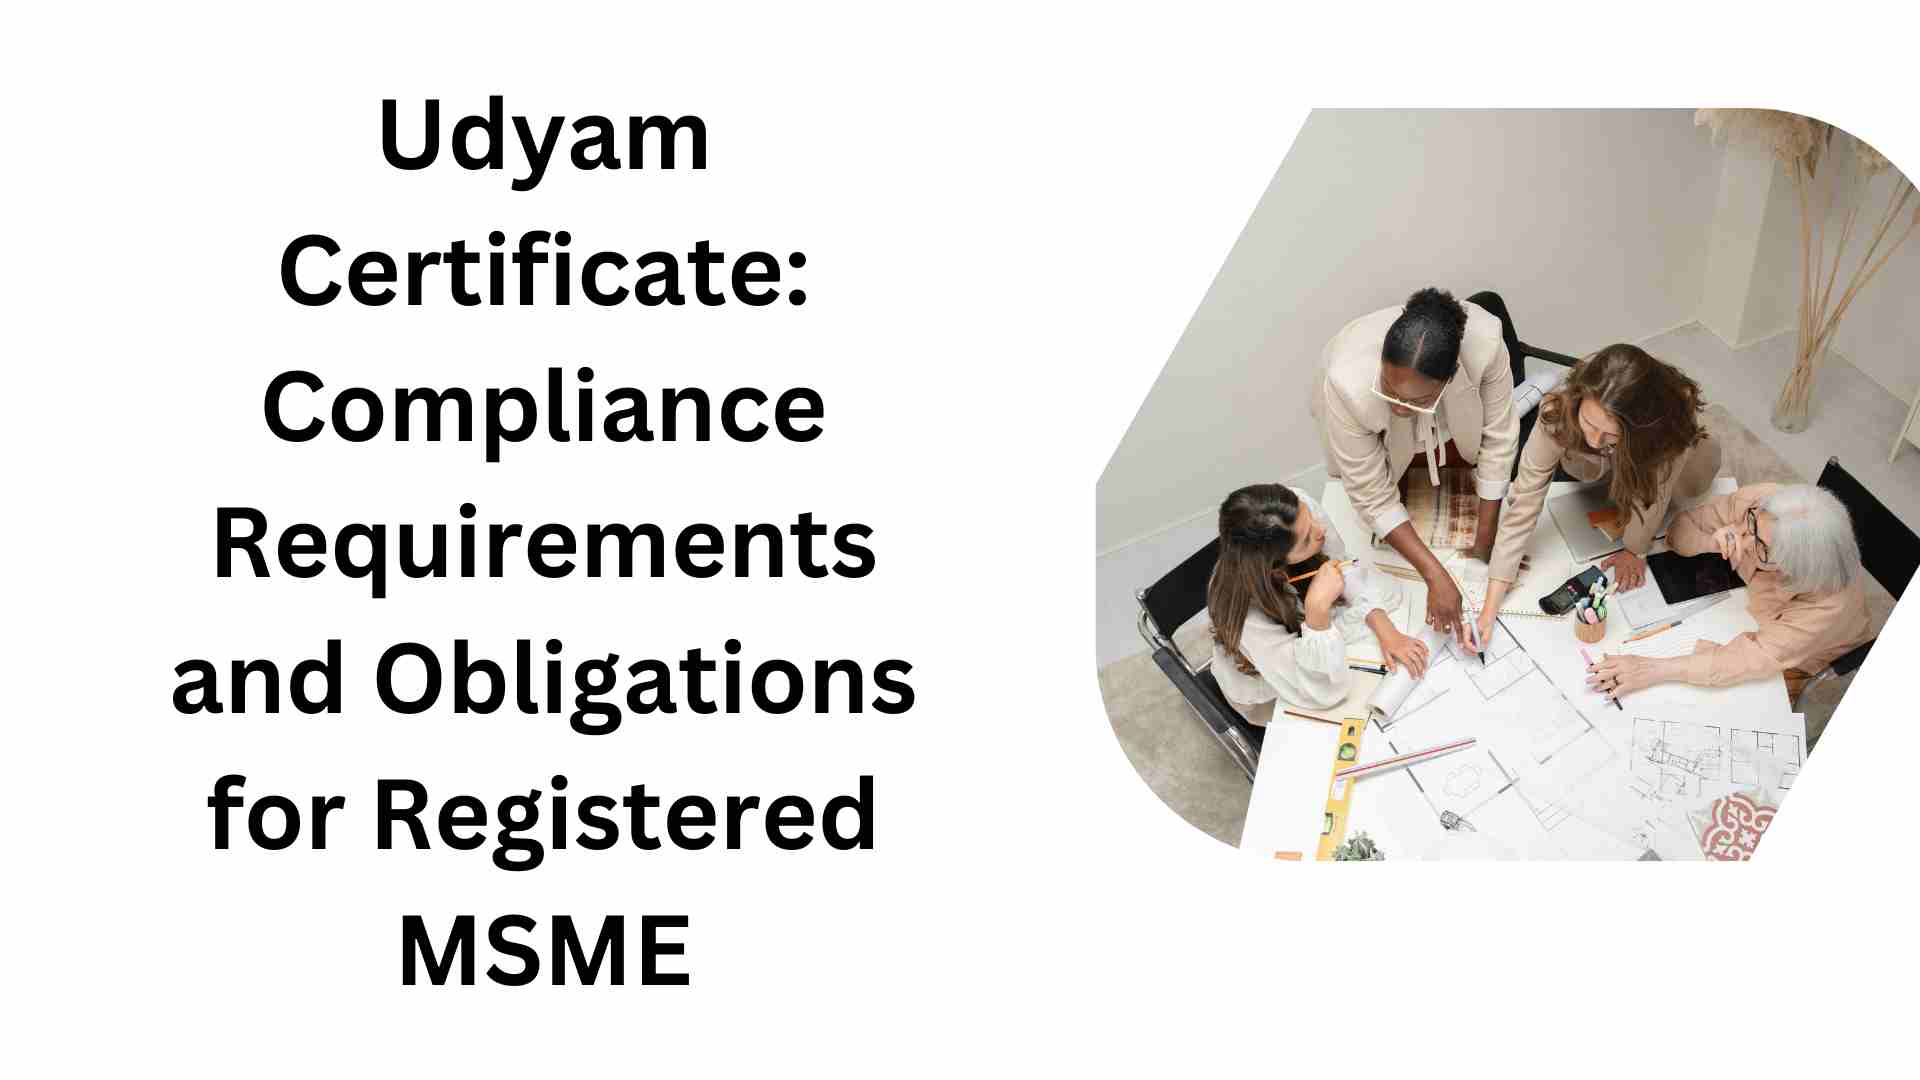 Udyam Certificate: Compliance Requirements and Obligations for Registered MSME